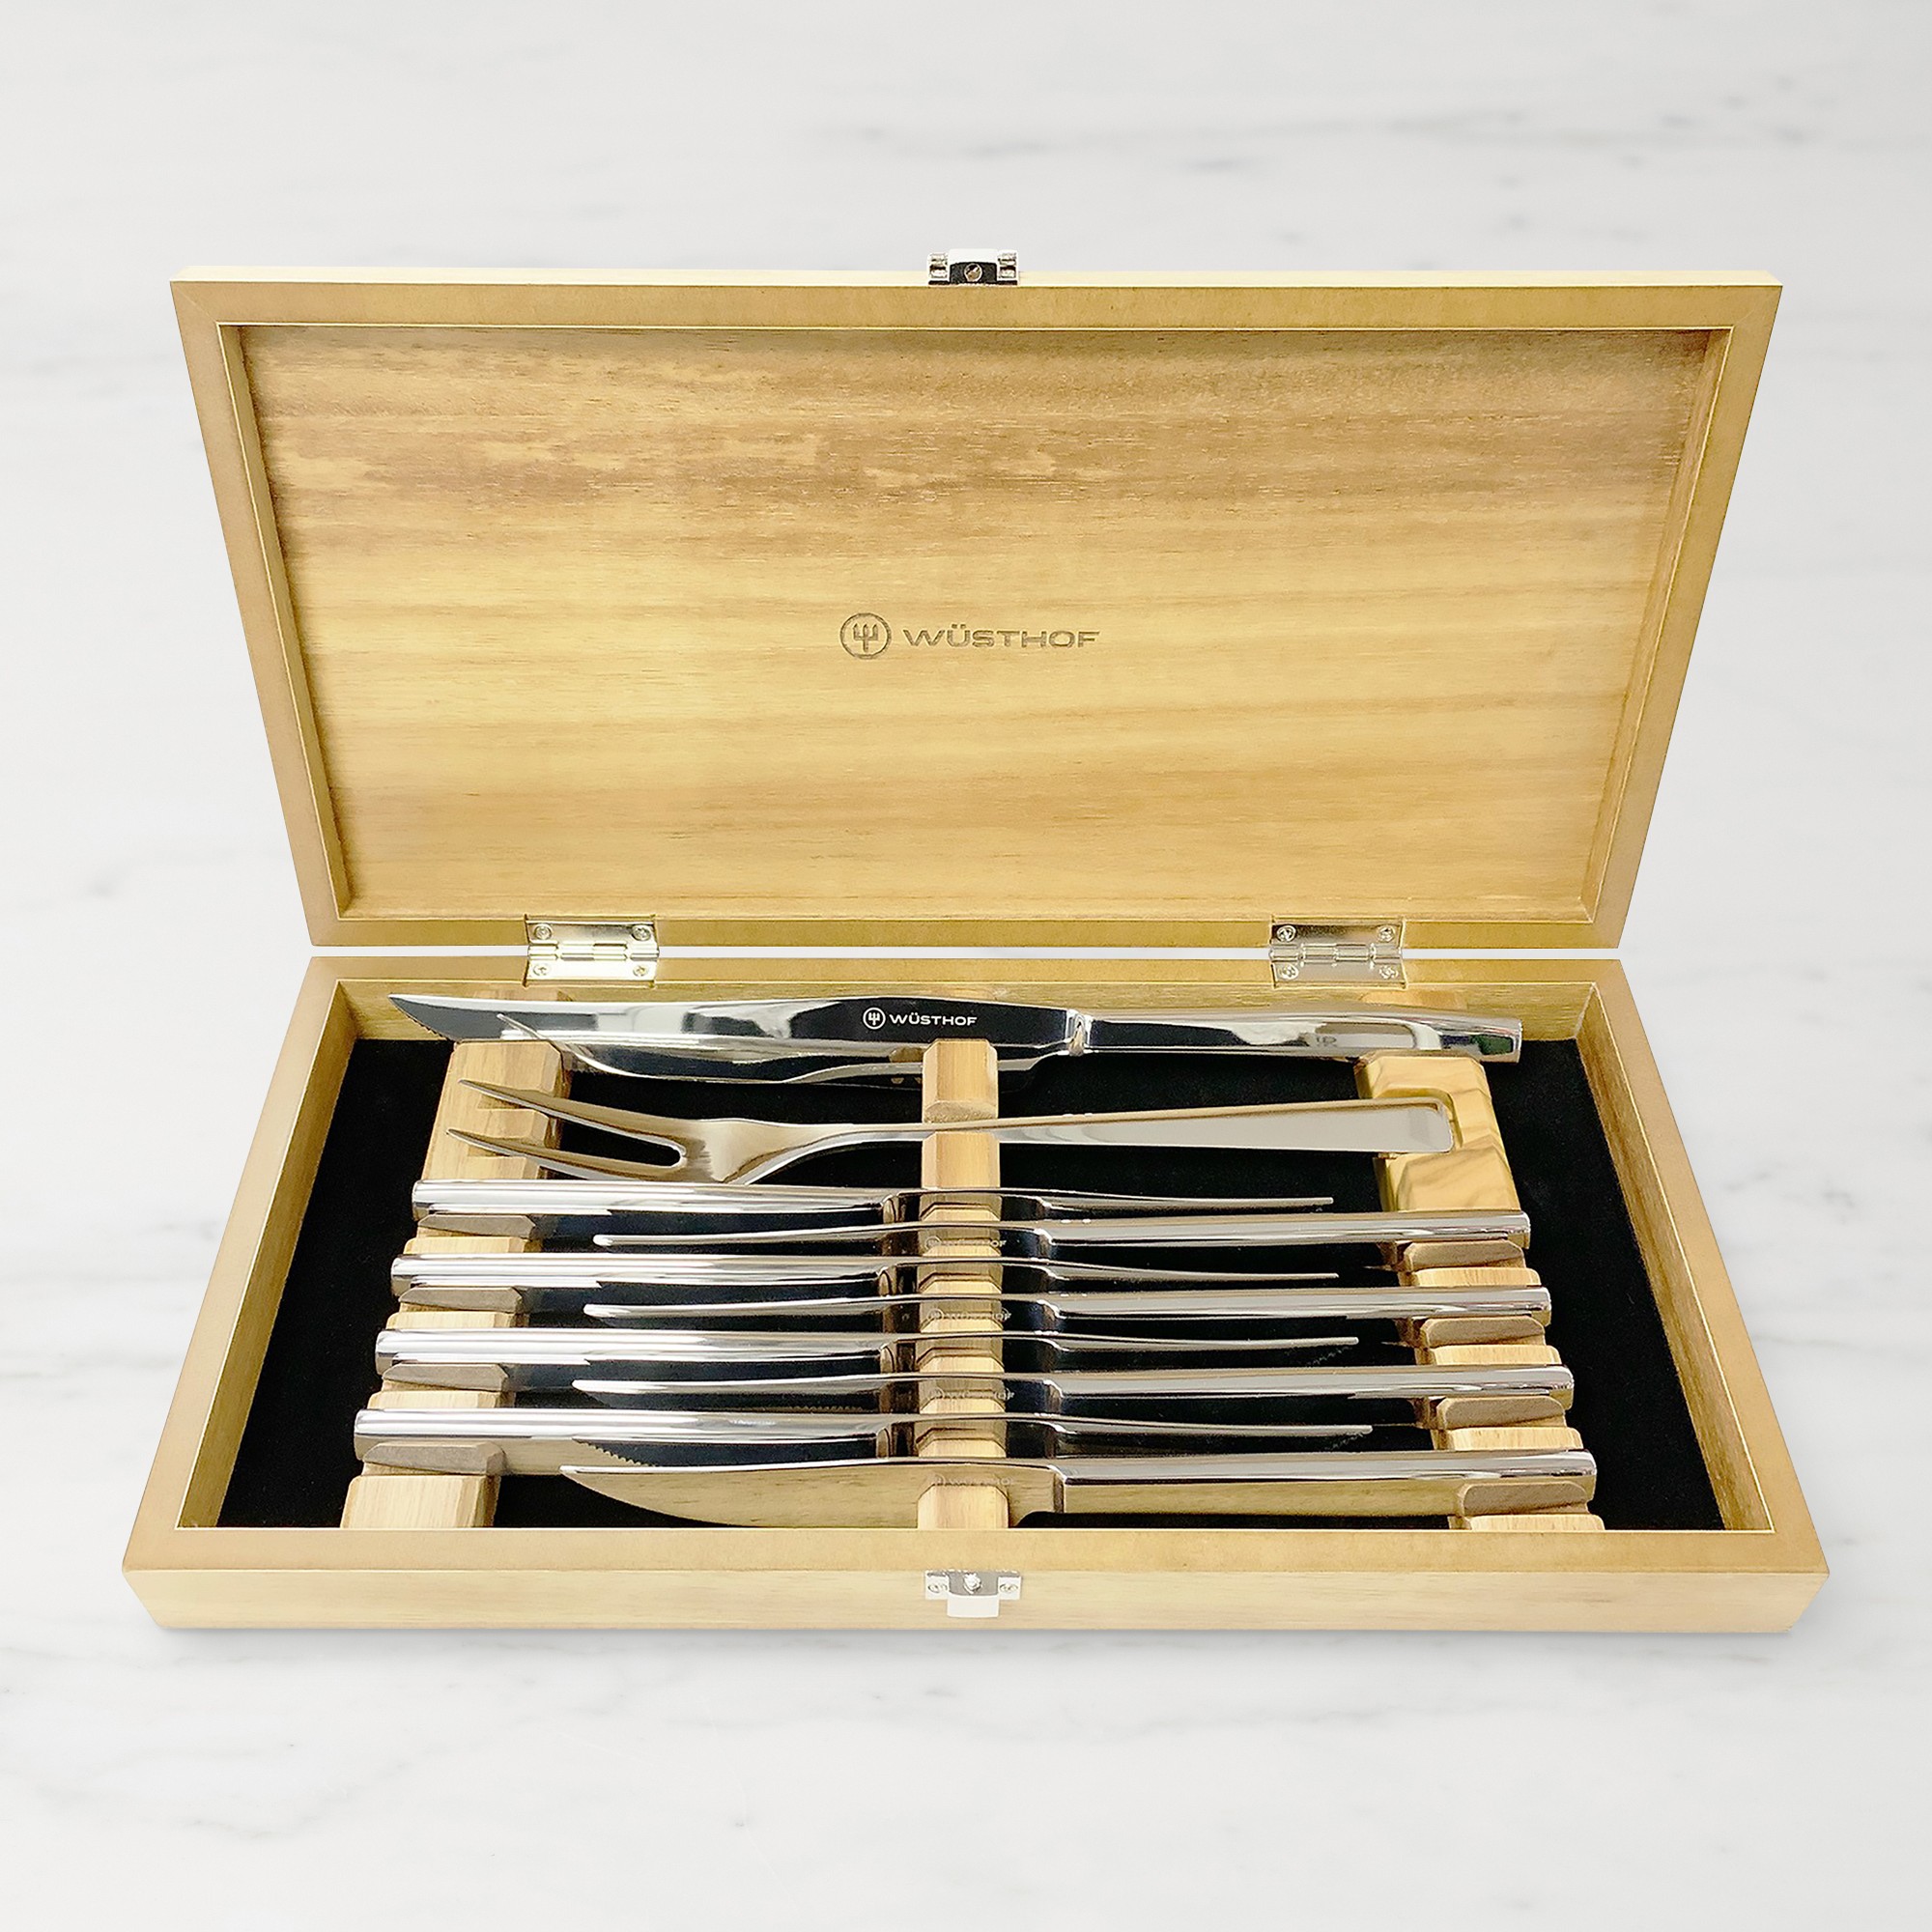 Wüsthof Stainless-Steel Steak and Carving Knives, Set of 10